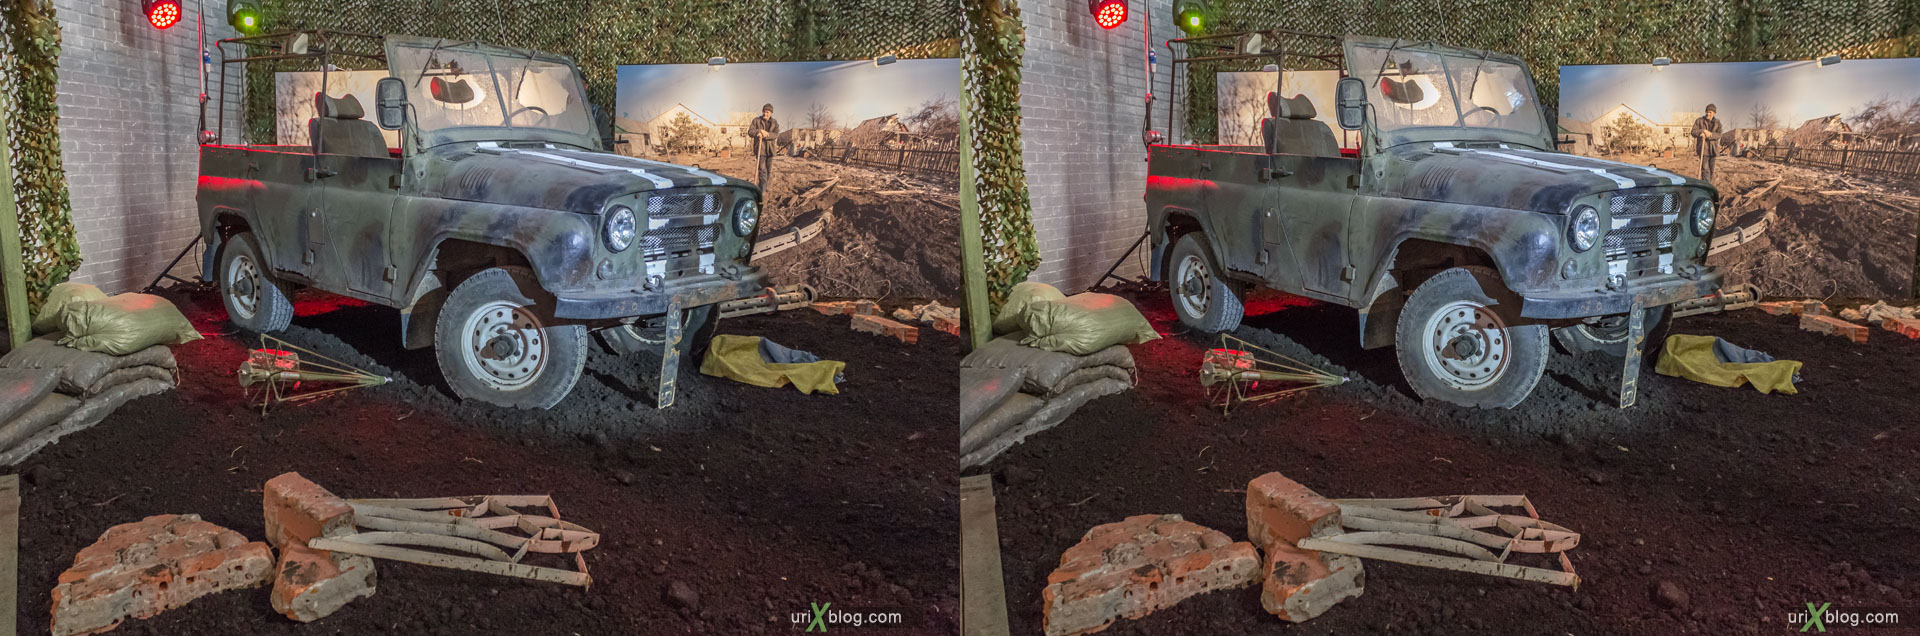 Material evidence, Physical evidence, real evidenca, exhibition, VDNKh, VVTs, Donbass, DNR, LNR, Ukraine, Moscow, Russia, 3D, stereo pair, cross-eyed, crossview, cross view stereo pair, stereoscopic, 2015